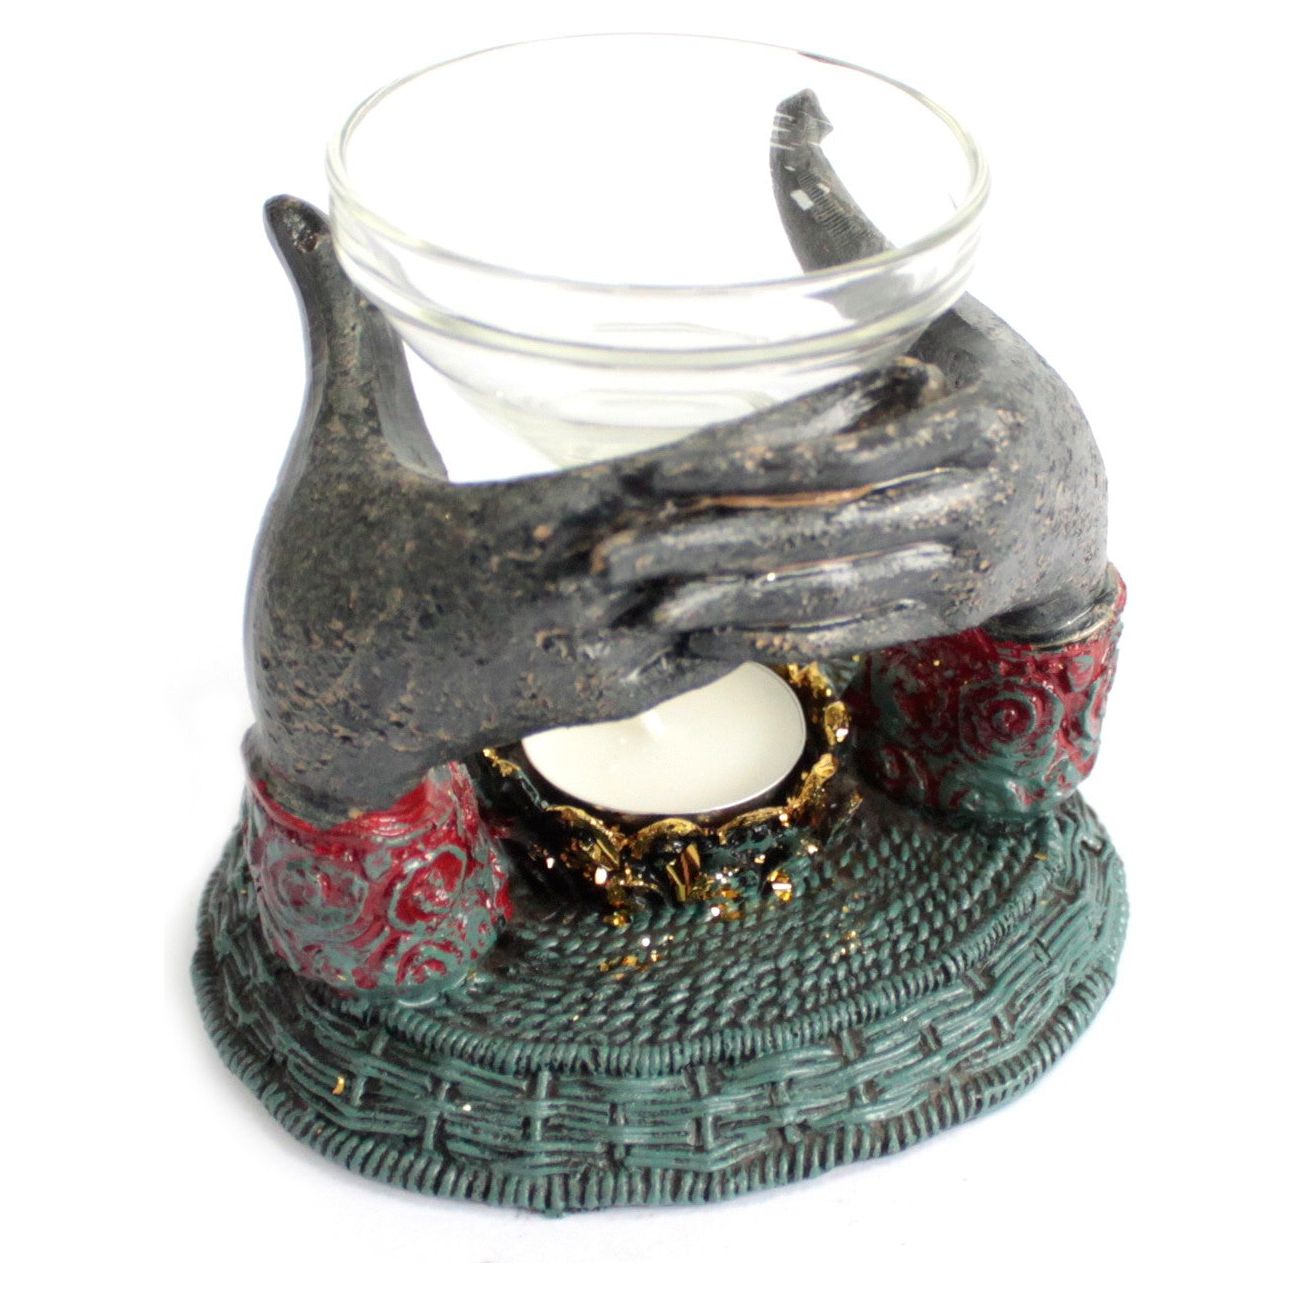 Antique Buddha - Offering Hands Oil Burner - Ashton and Finch